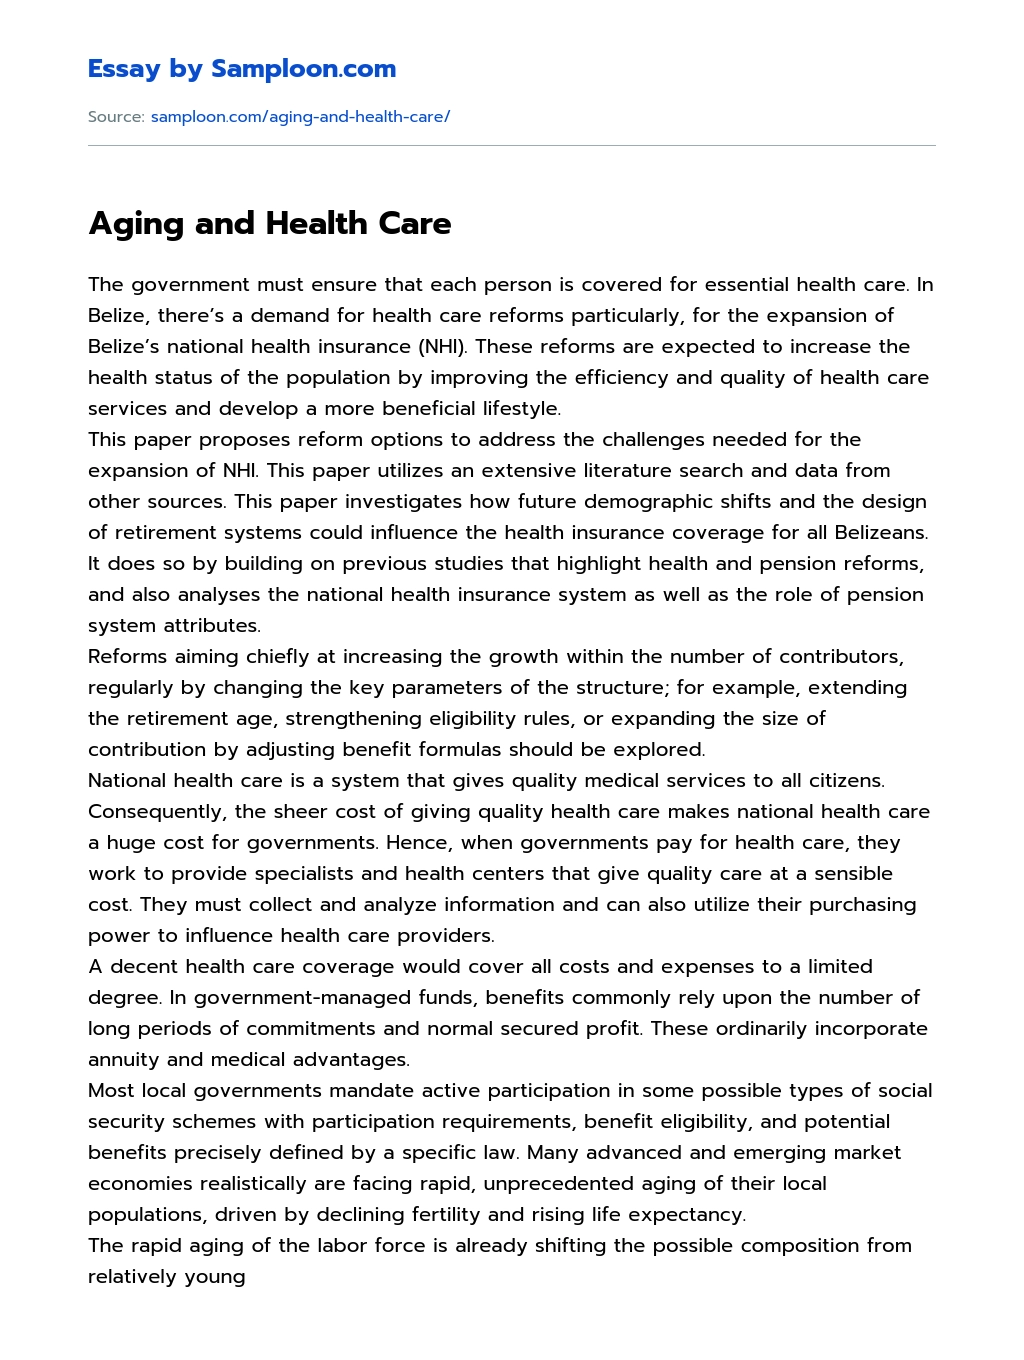 Aging and Health Care essay